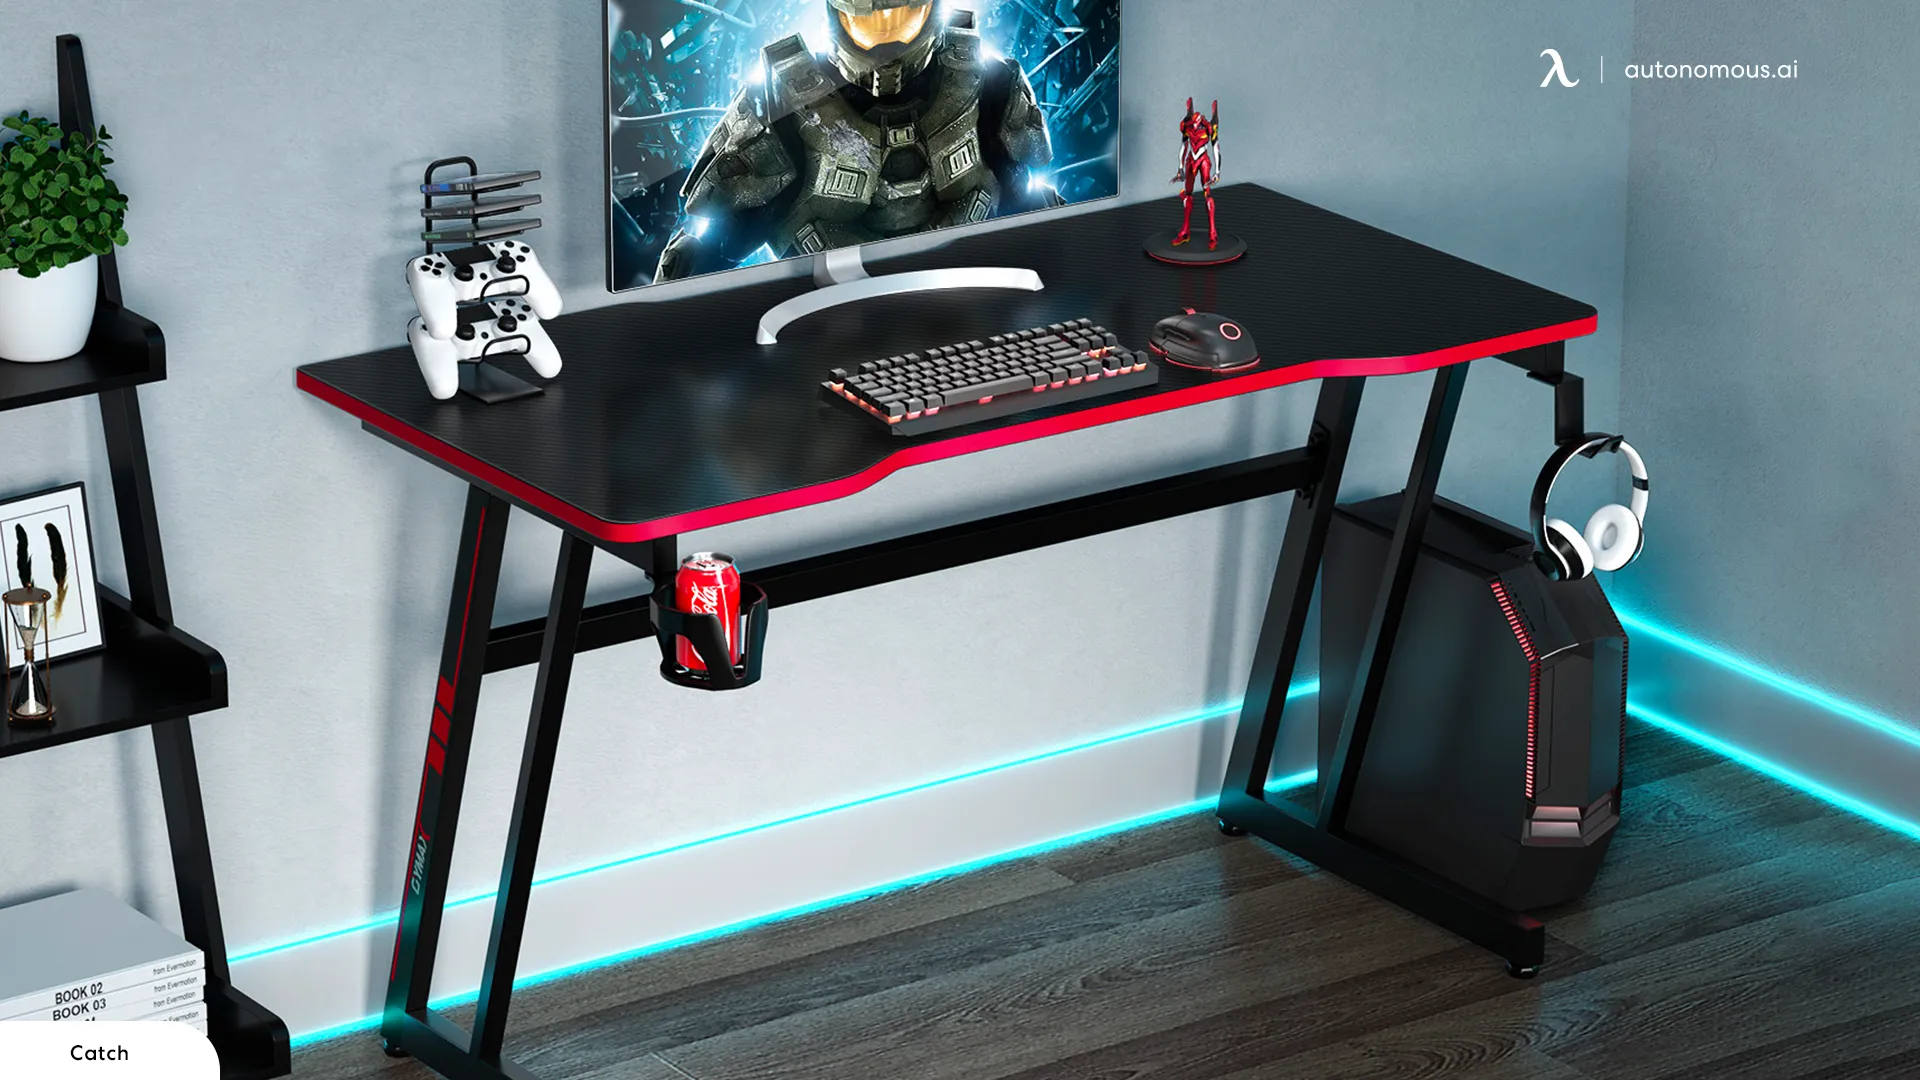 The Ultimate Gaming Experience With Z-shaped Gaming Desks